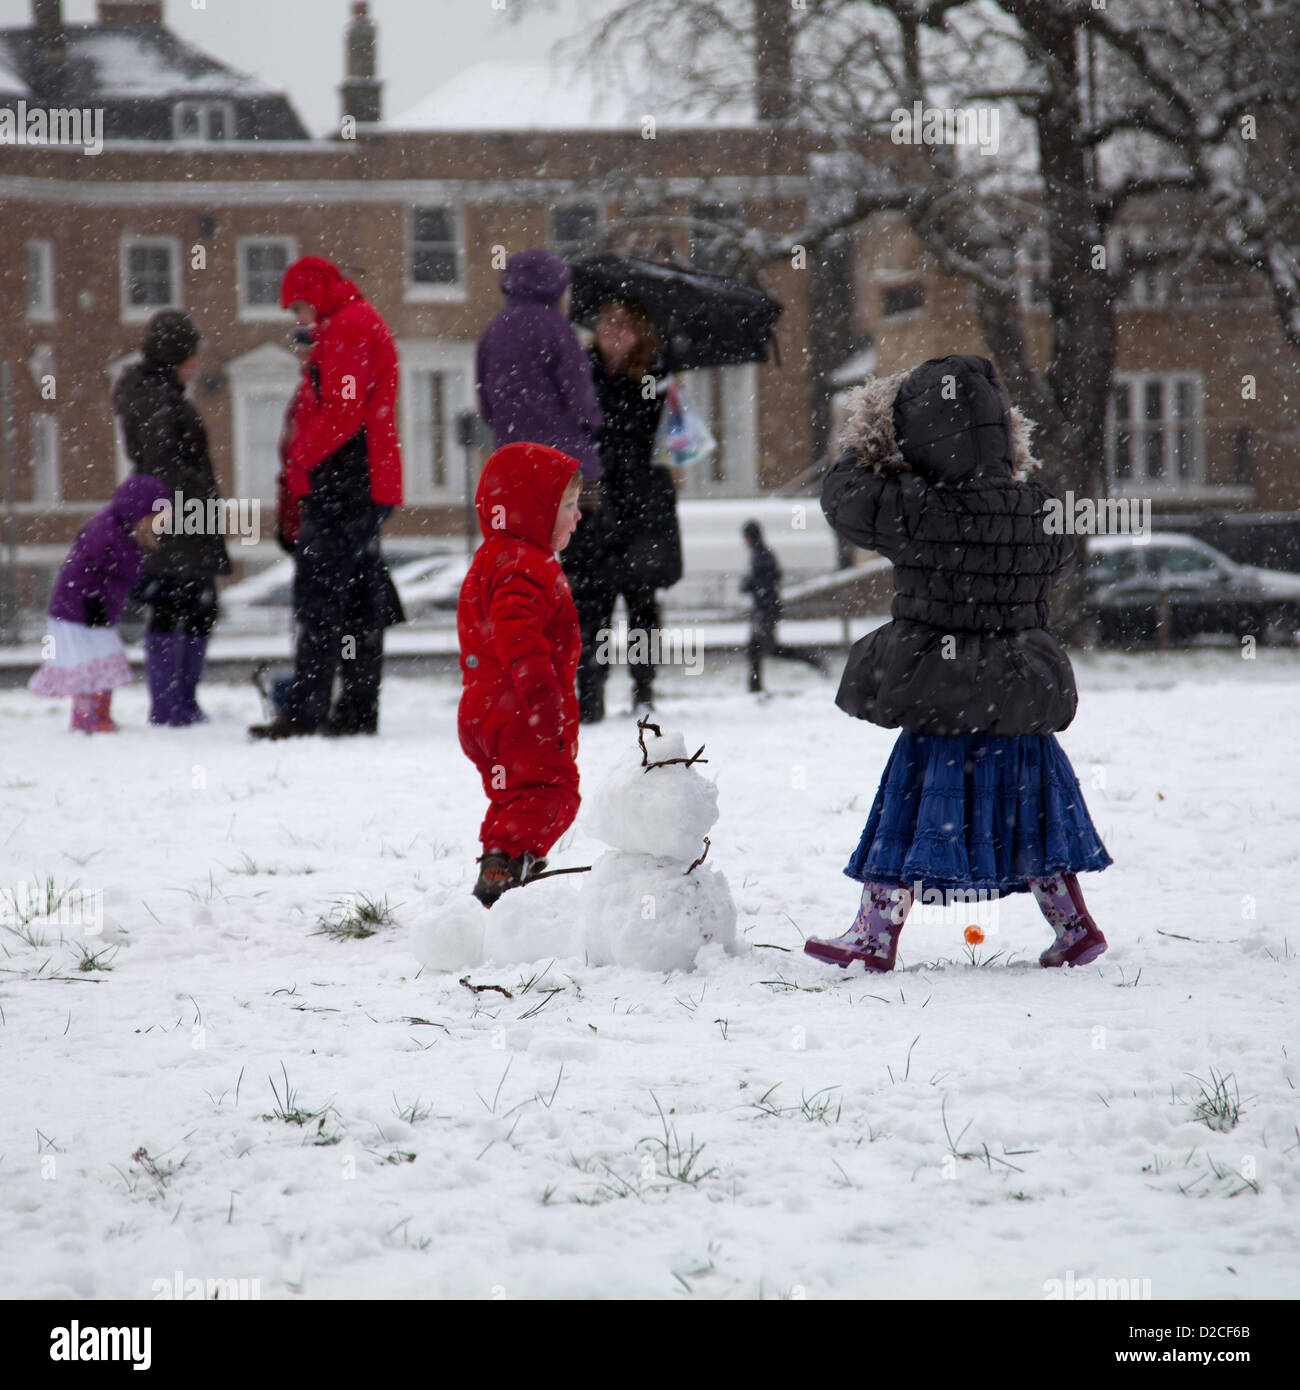 20 January 2013  13.16 PM - Snow falls on Clapham Common in Clapham, London, UK. Children playing in the snow. Stock Photo